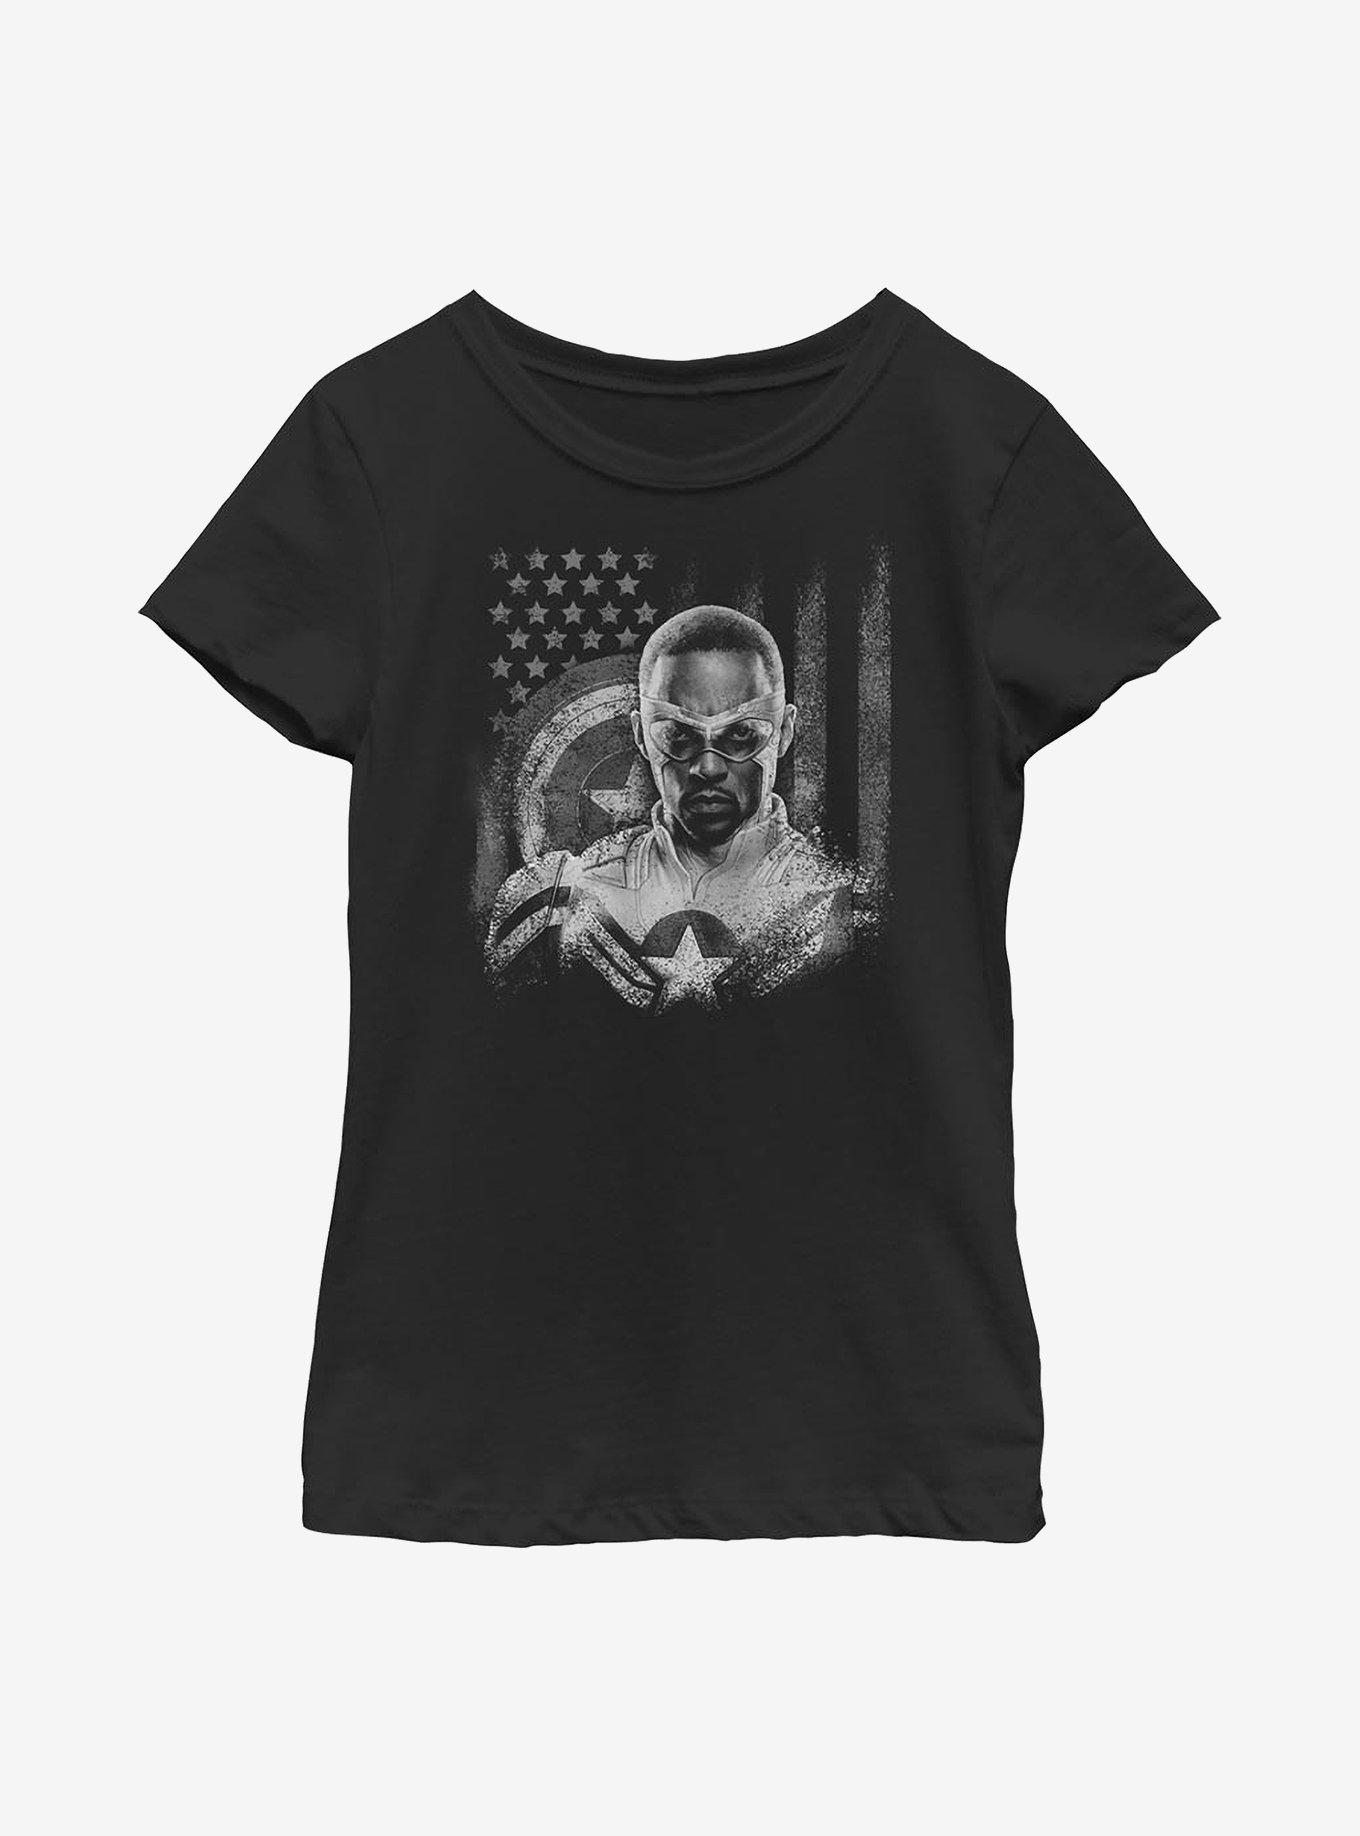 Marvel Falcon And The Winter Soldier Captain America Youth Girls T-Shirt, BLACK, hi-res